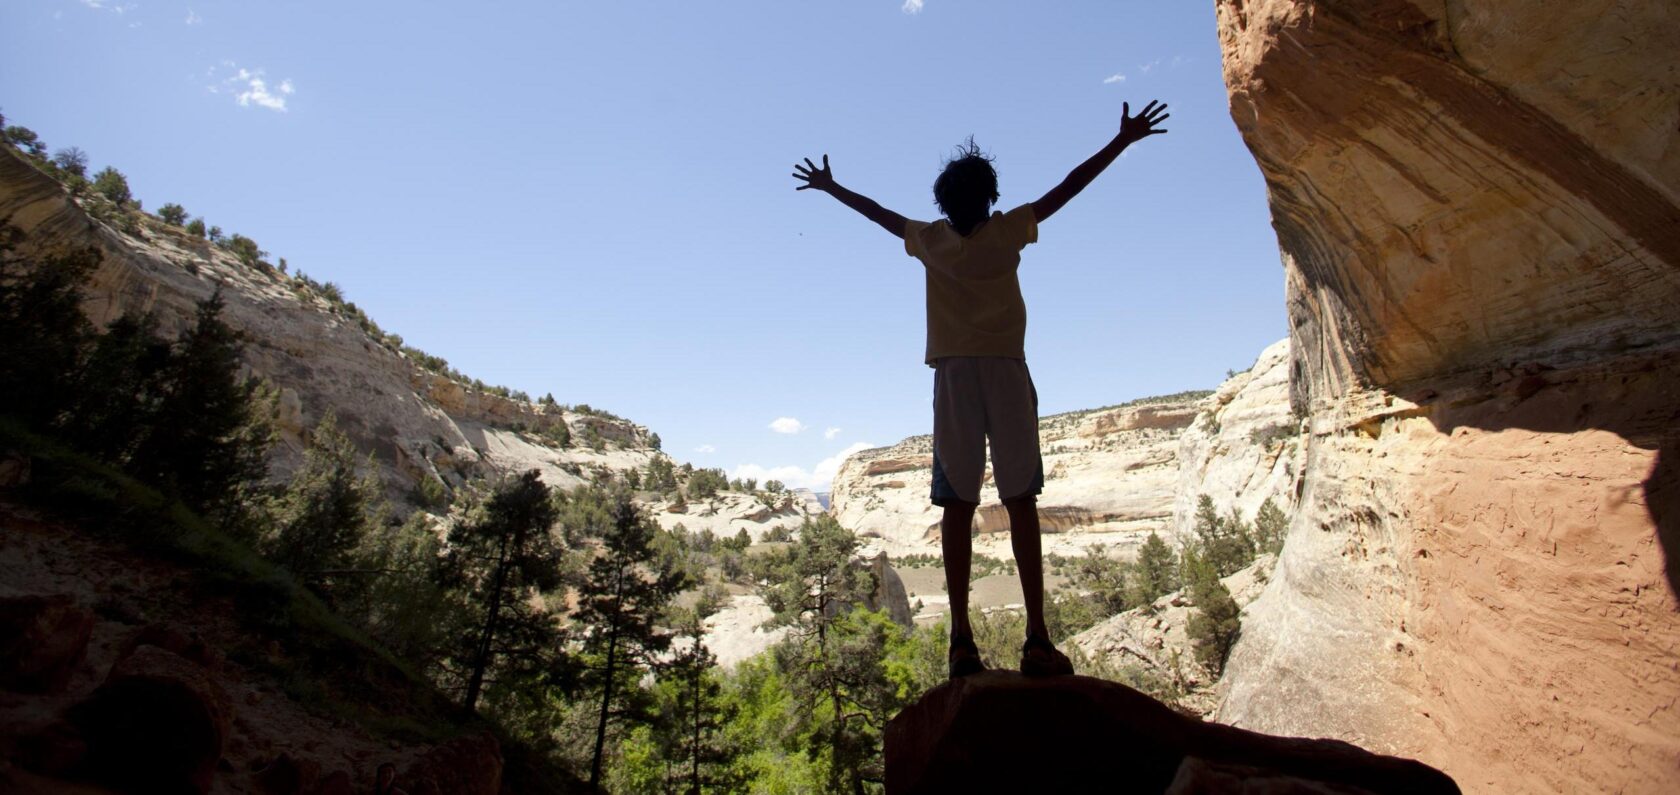 A person raises their arms to celebrate rocks on the Yampa River.